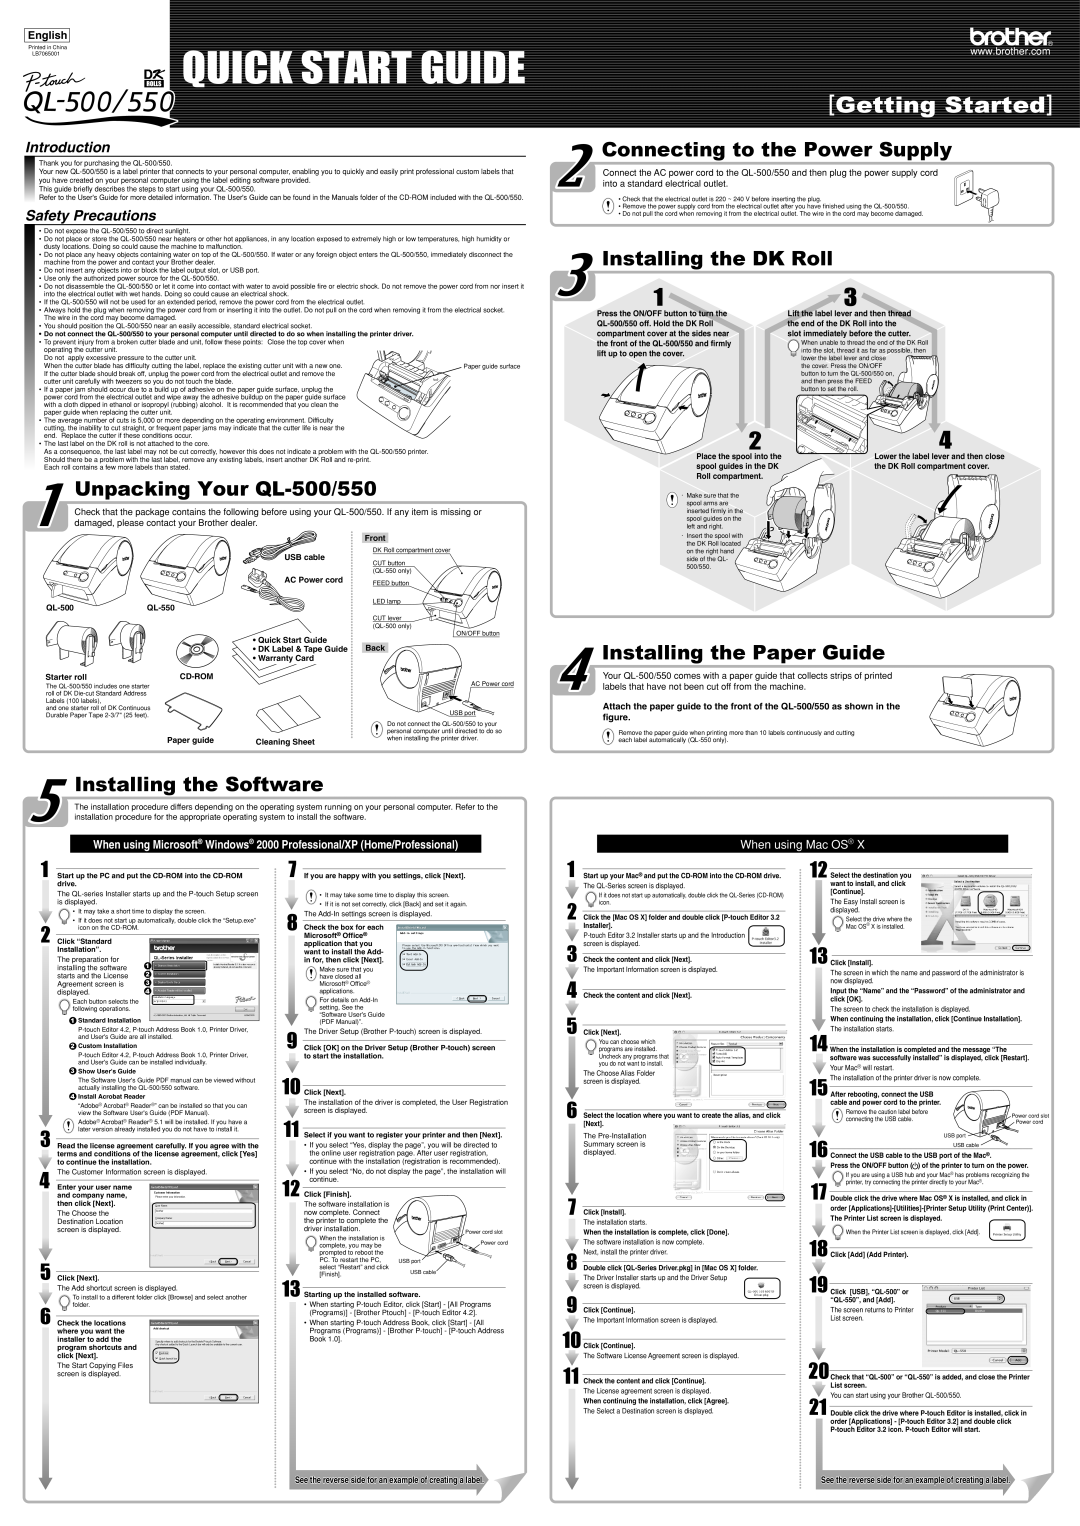 Brother QL-series quick start Quick Start Guide, Getting Started, Unpacking Your QL-500/550, Installing the DK Roll 